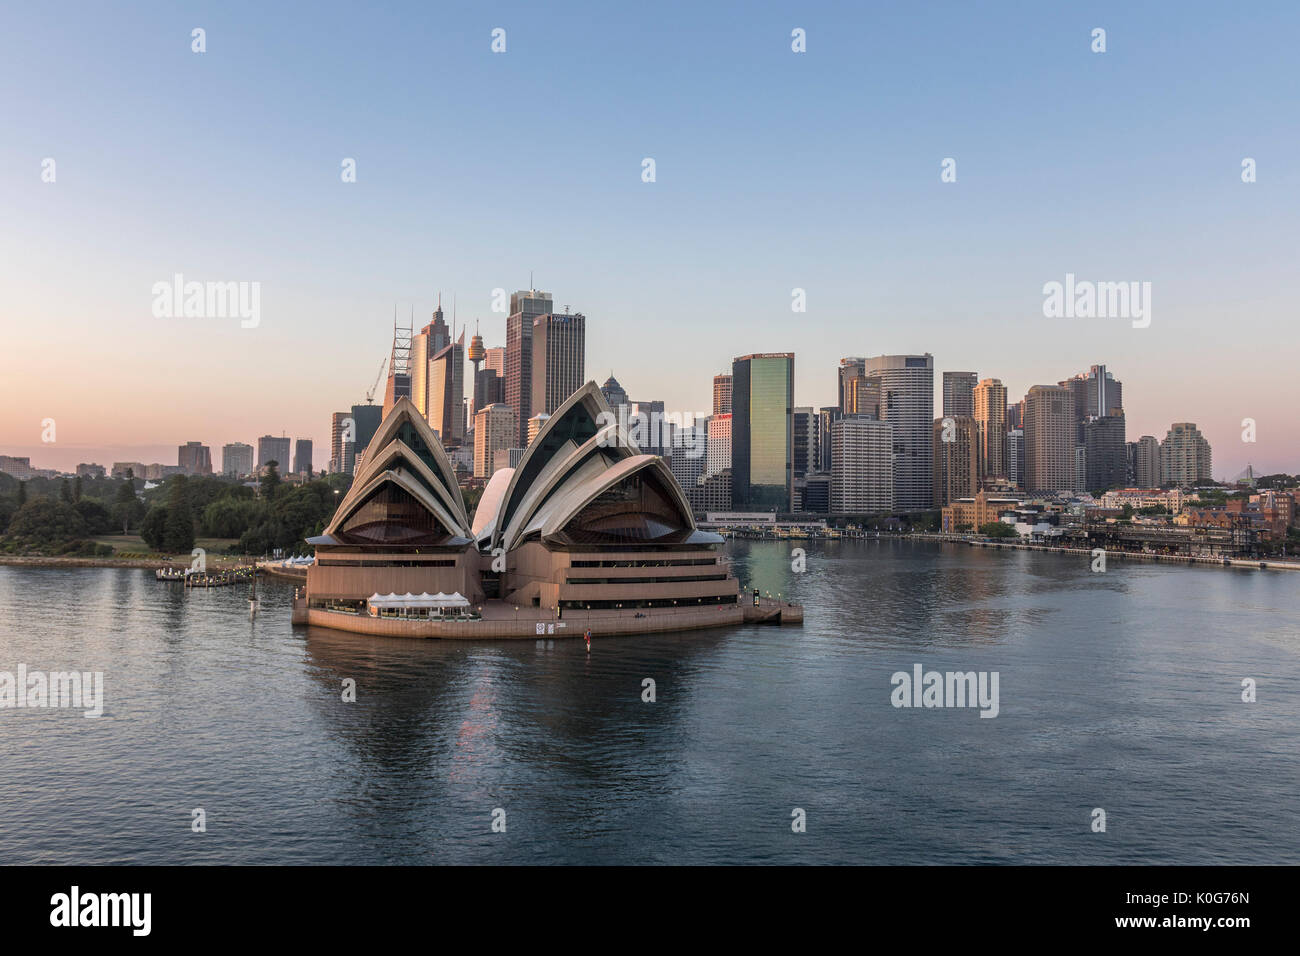 Sunrise At Sydney Opera House And Downtown City Central Business District (CBD), Skyline With Circular Quay Australia Stock Photo